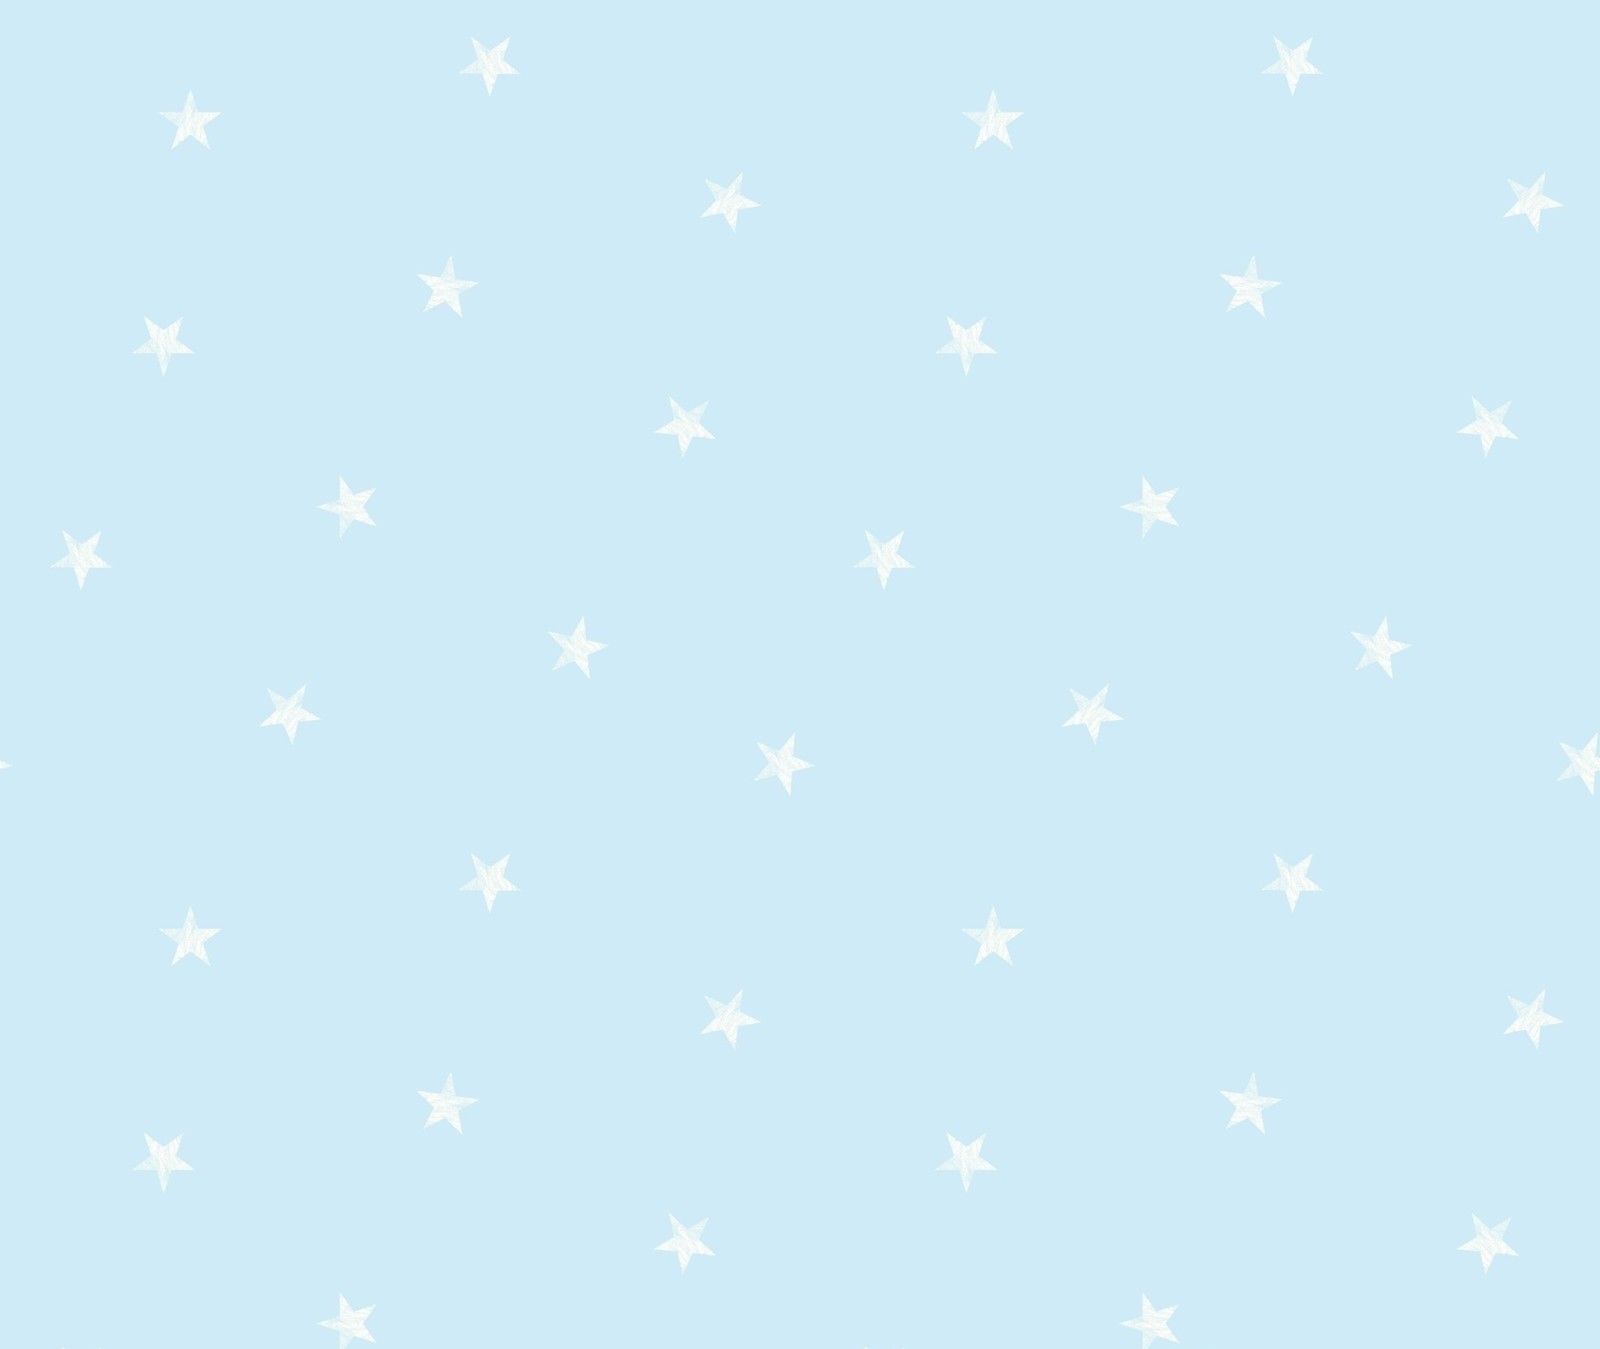 Baby Blue Images  Free Photos PNG Stickers Wallpapers  Backgrounds   rawpixel